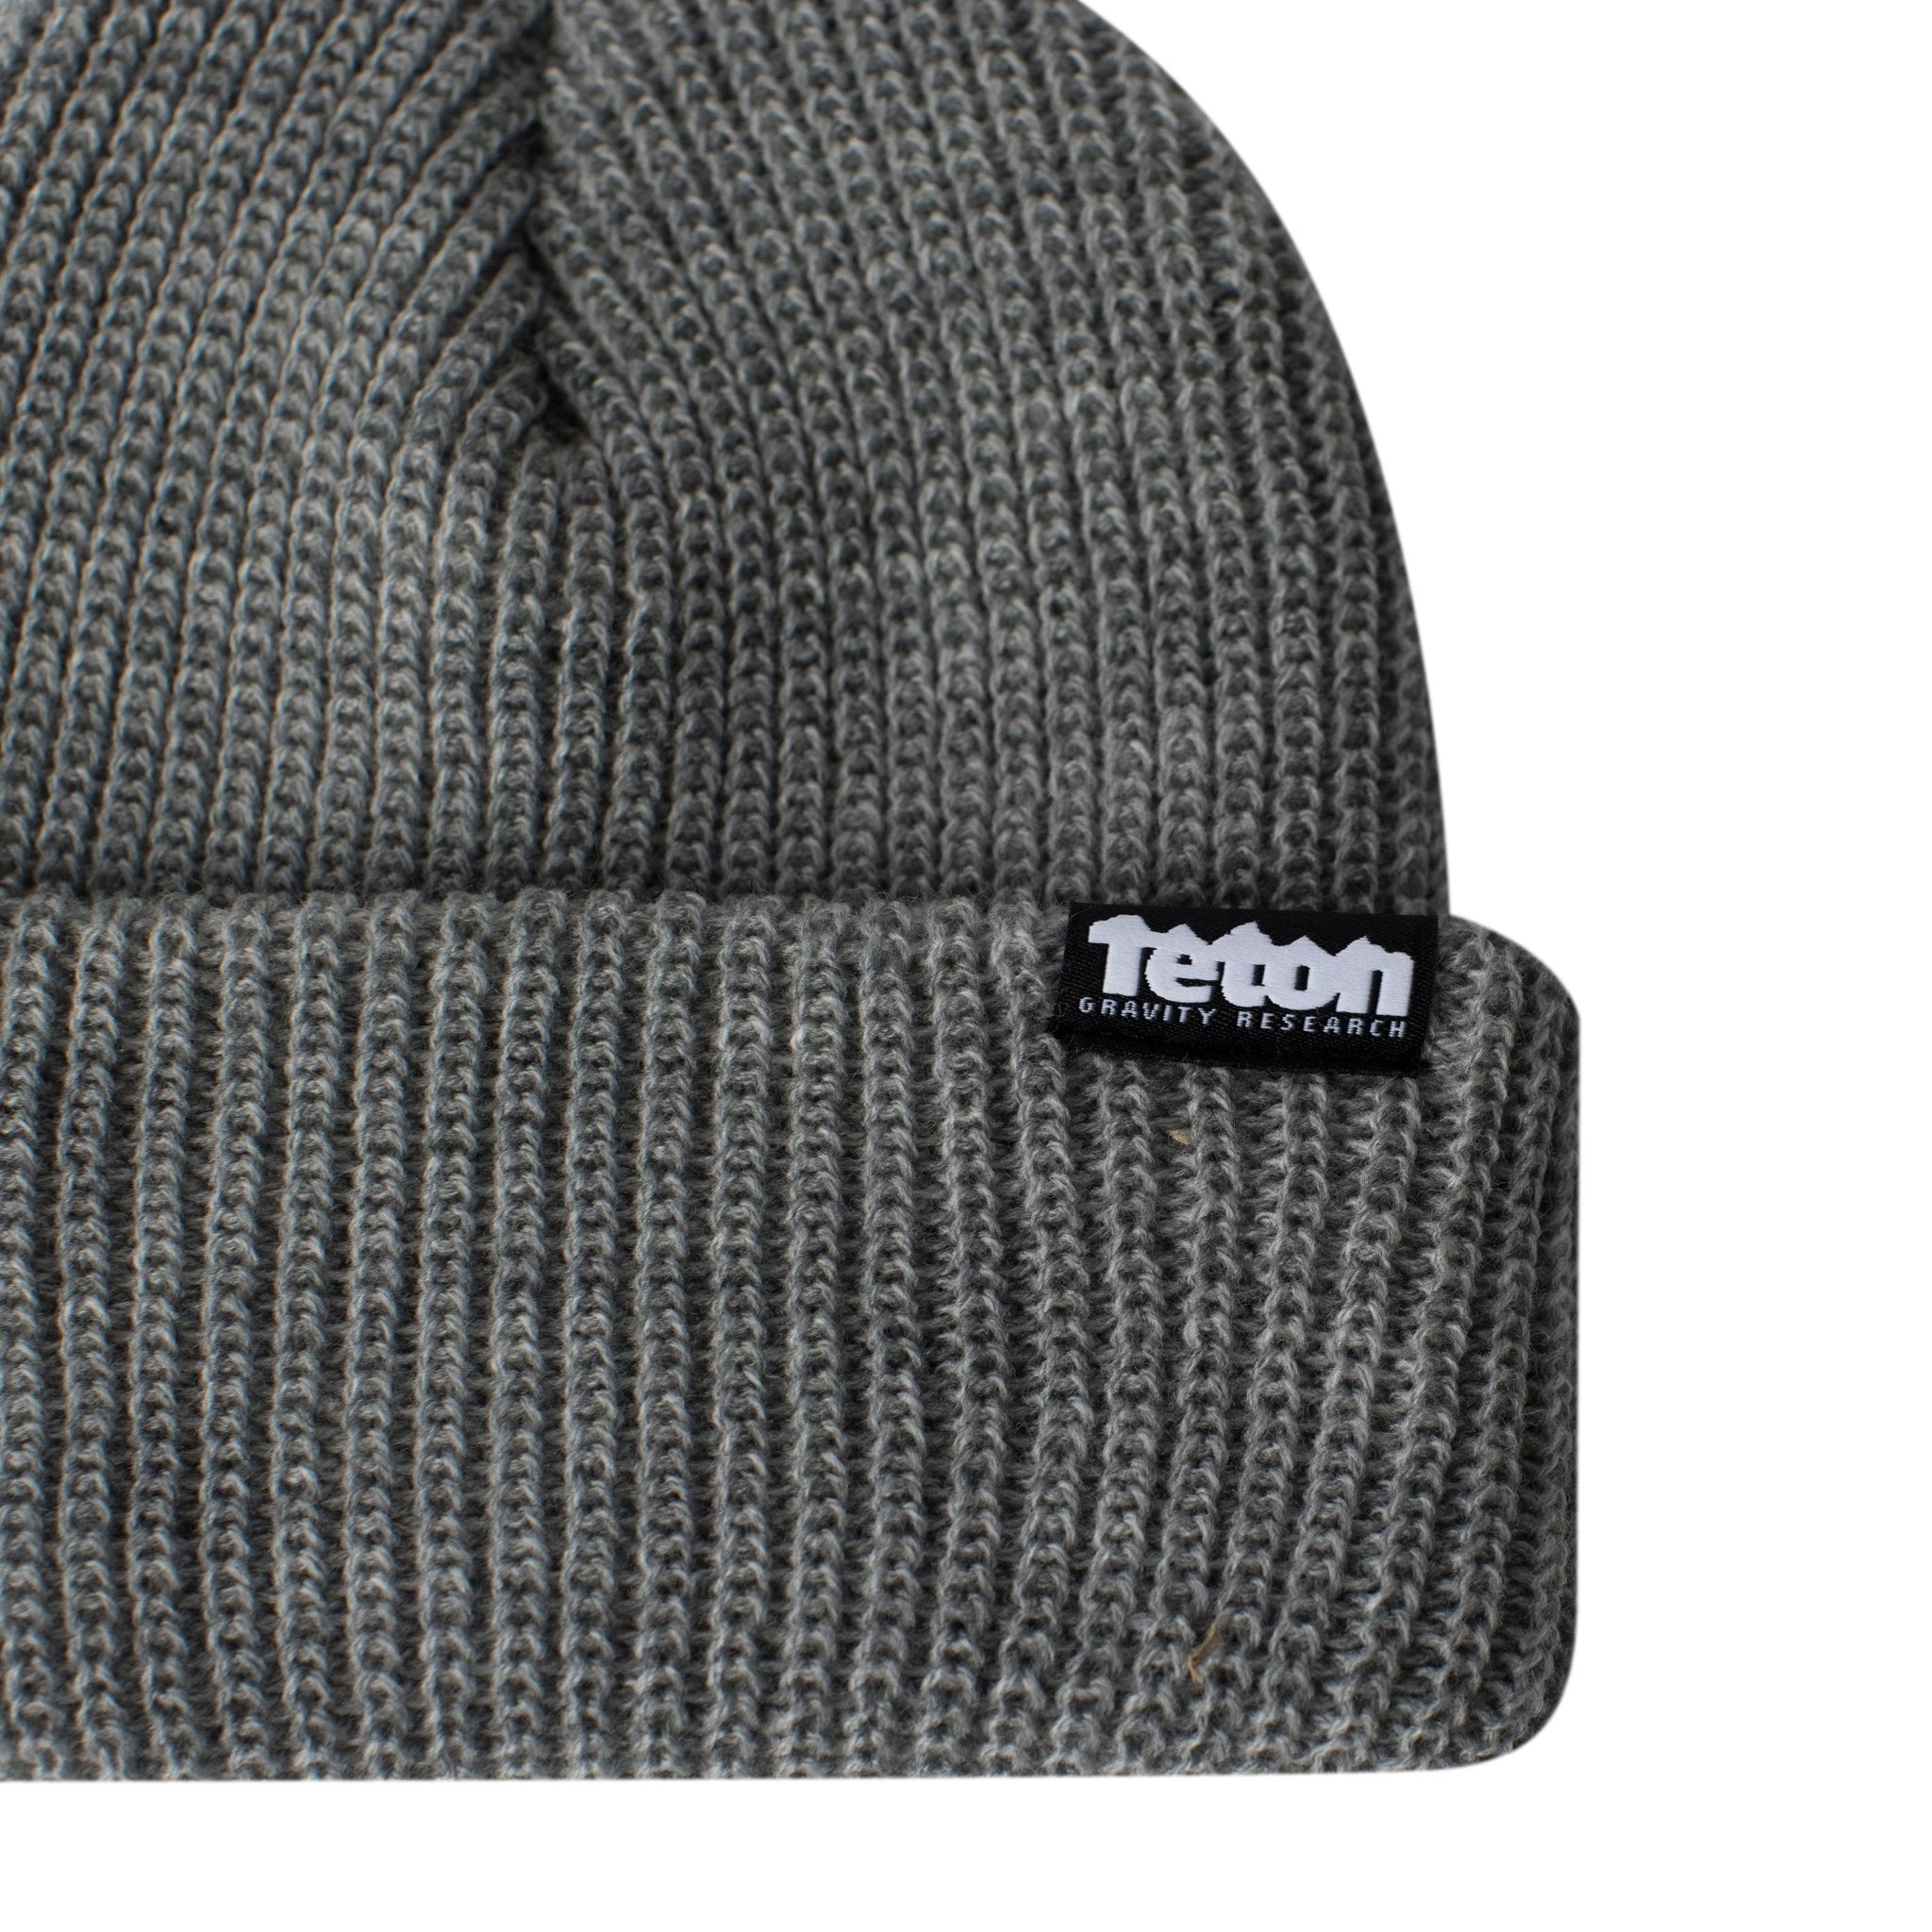 Solid Watch Beanie - Teton Gravity Research #color_gray